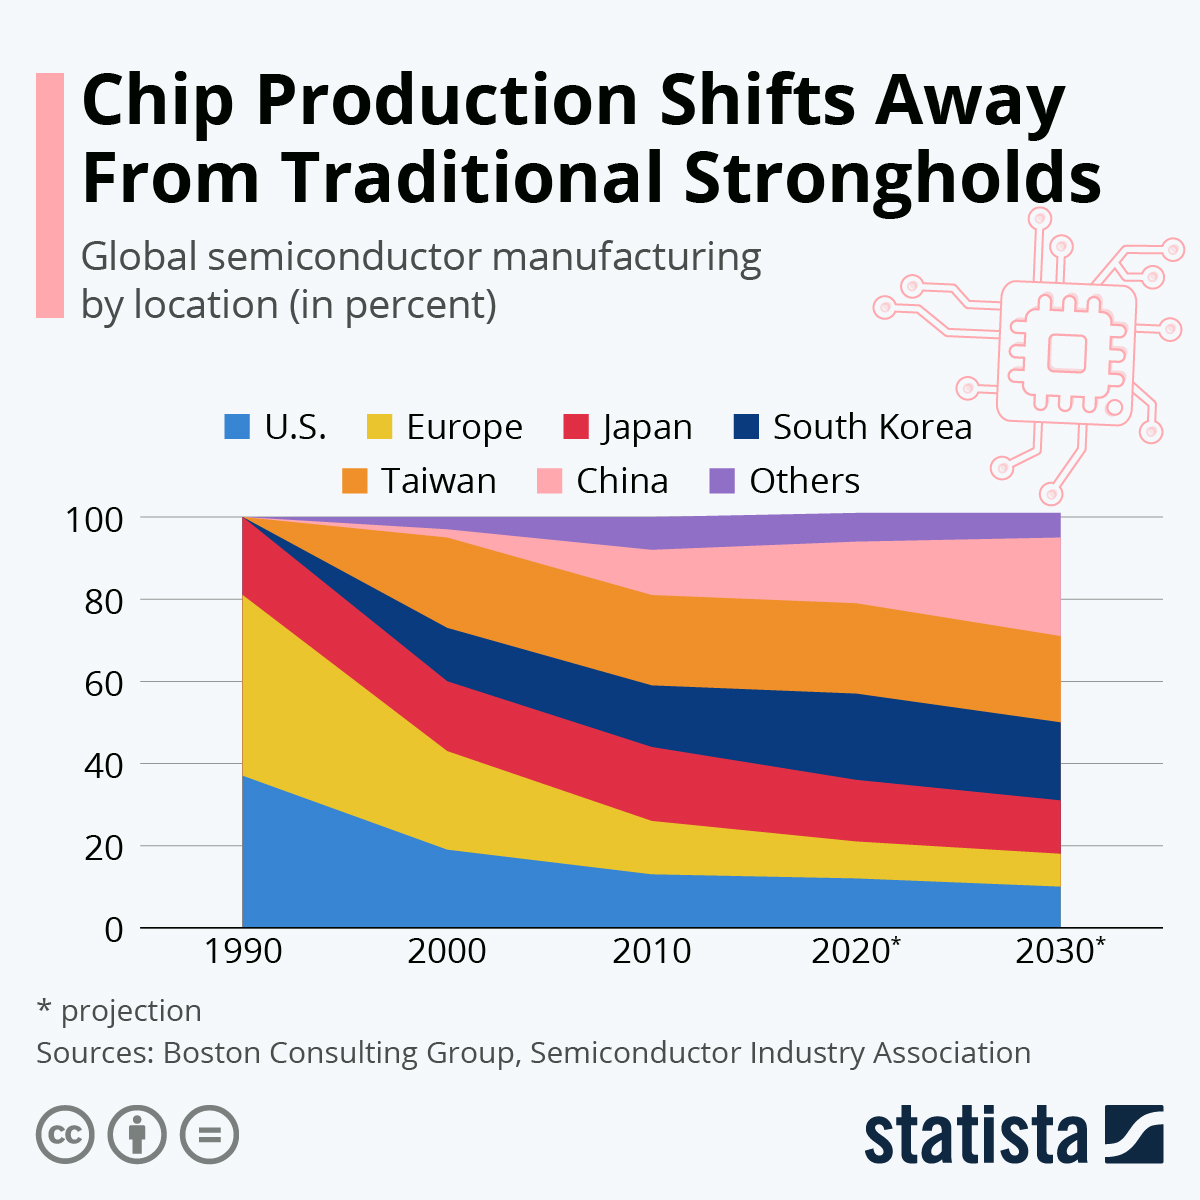 Chip Production Shifts Away From Traditional Strongholds